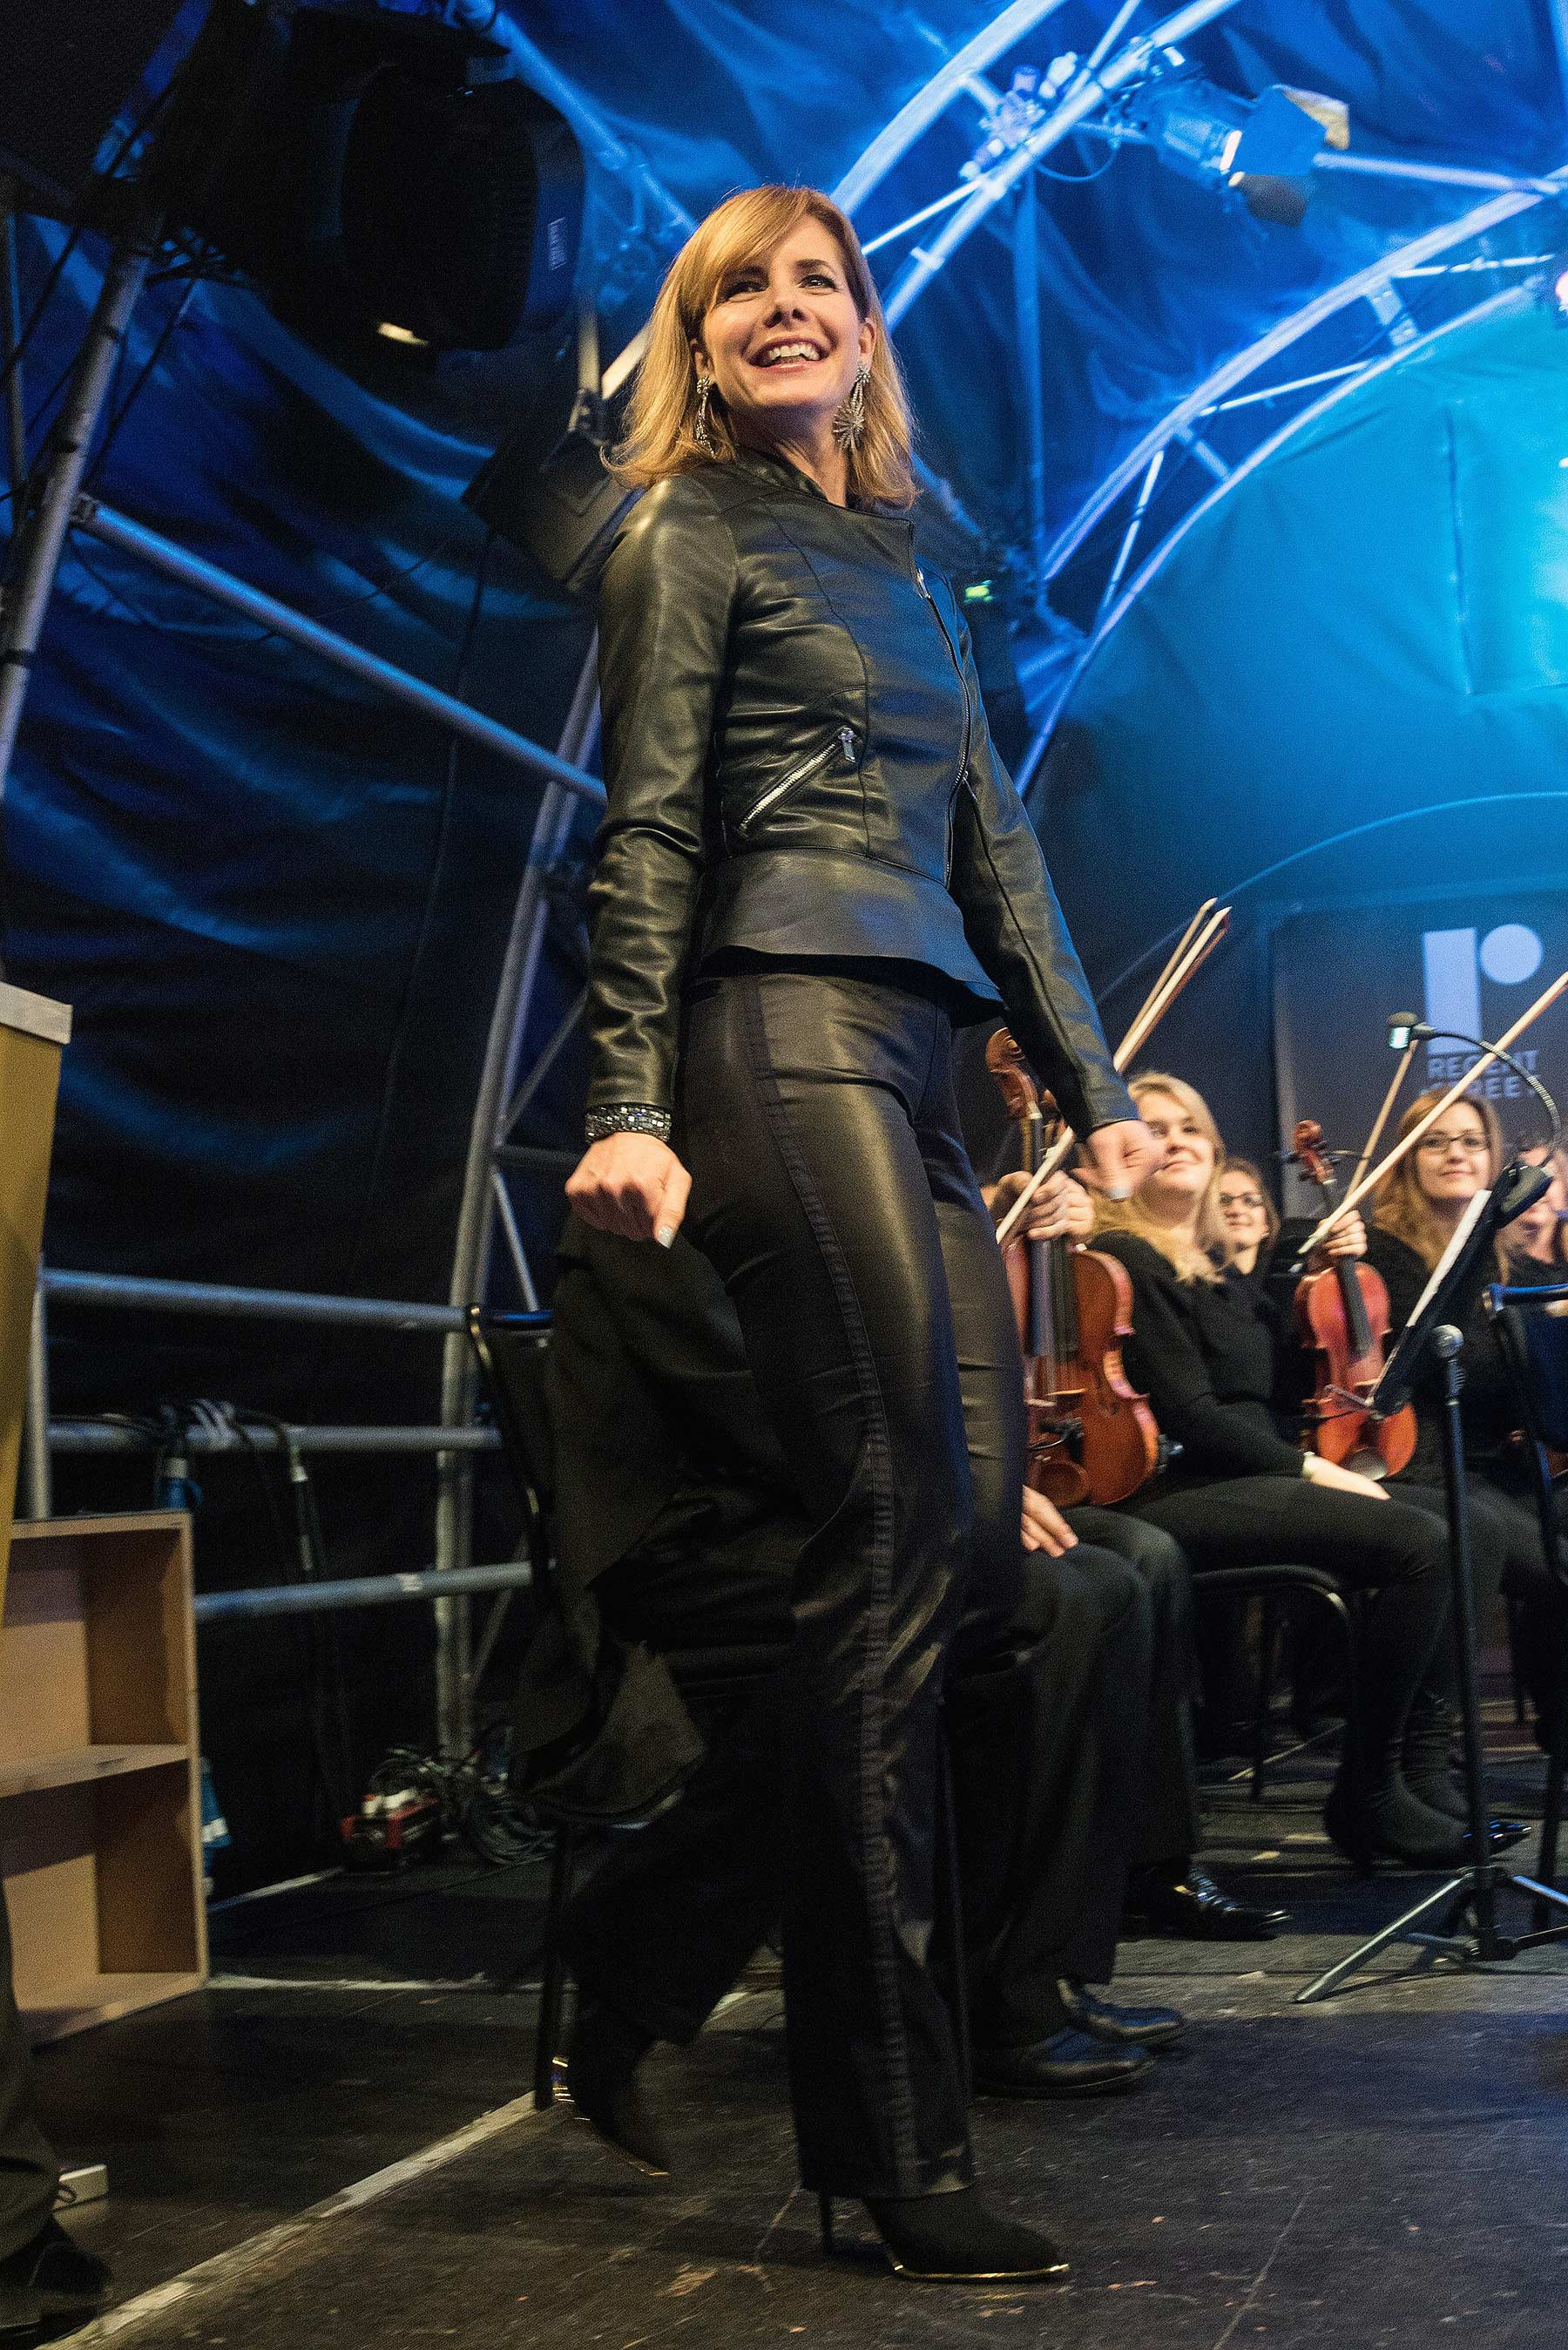 Darcey Bussell attends Xmas Light Switch On